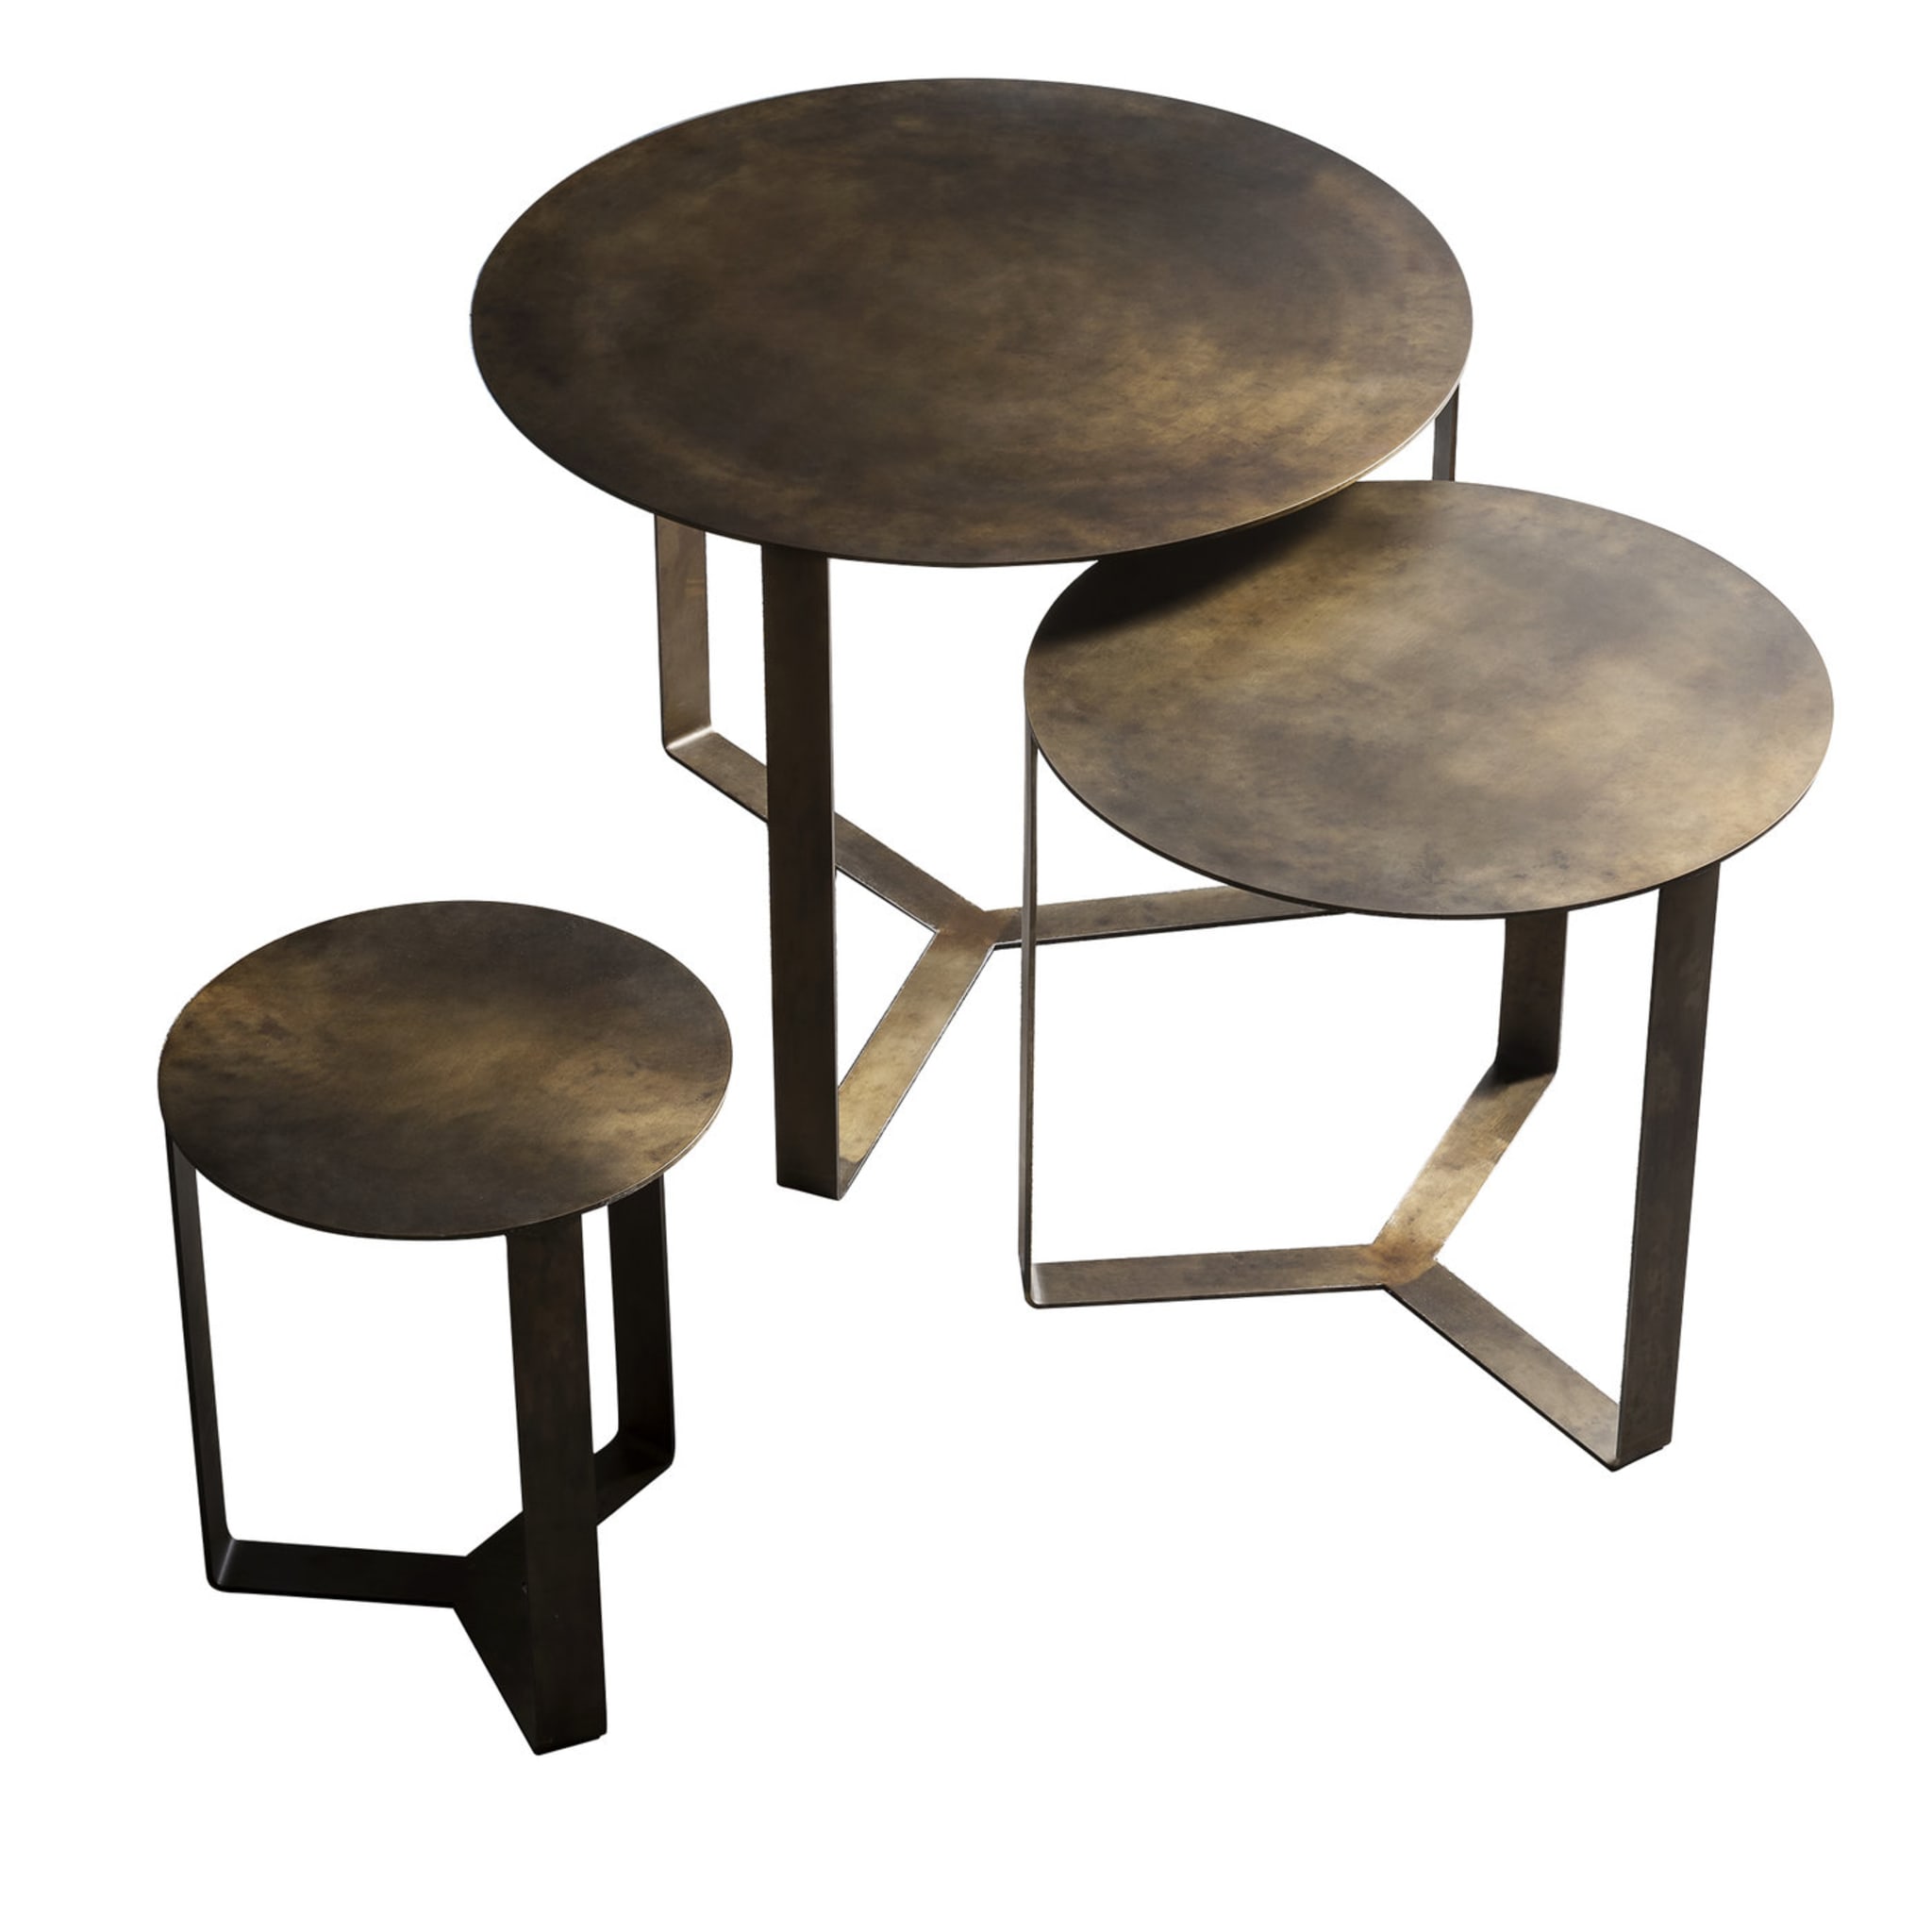 Tris Set Of 3 Nesting Tables - Main view